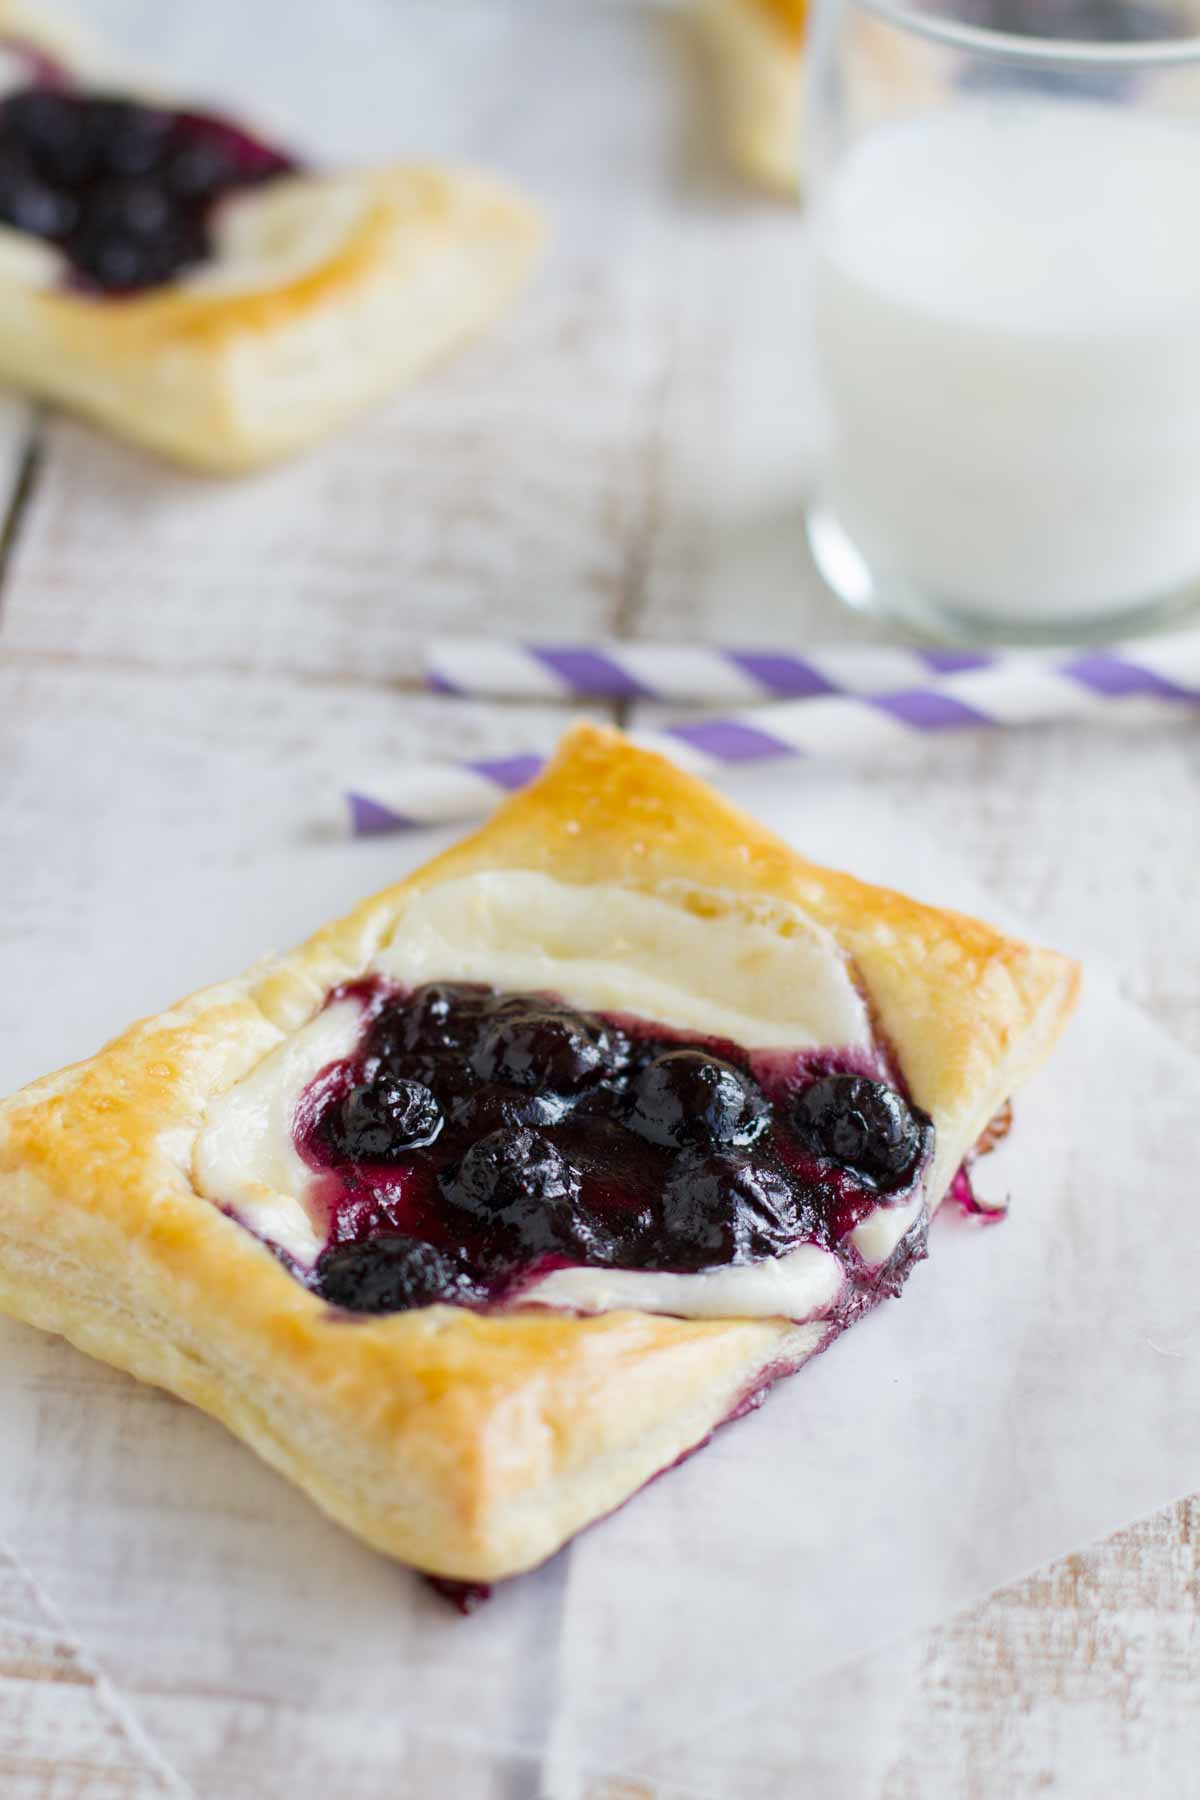 Blueberry Dessert Recipes With Cream Cheese
 Blueberry Cream Cheese Pastries Taste and Tell